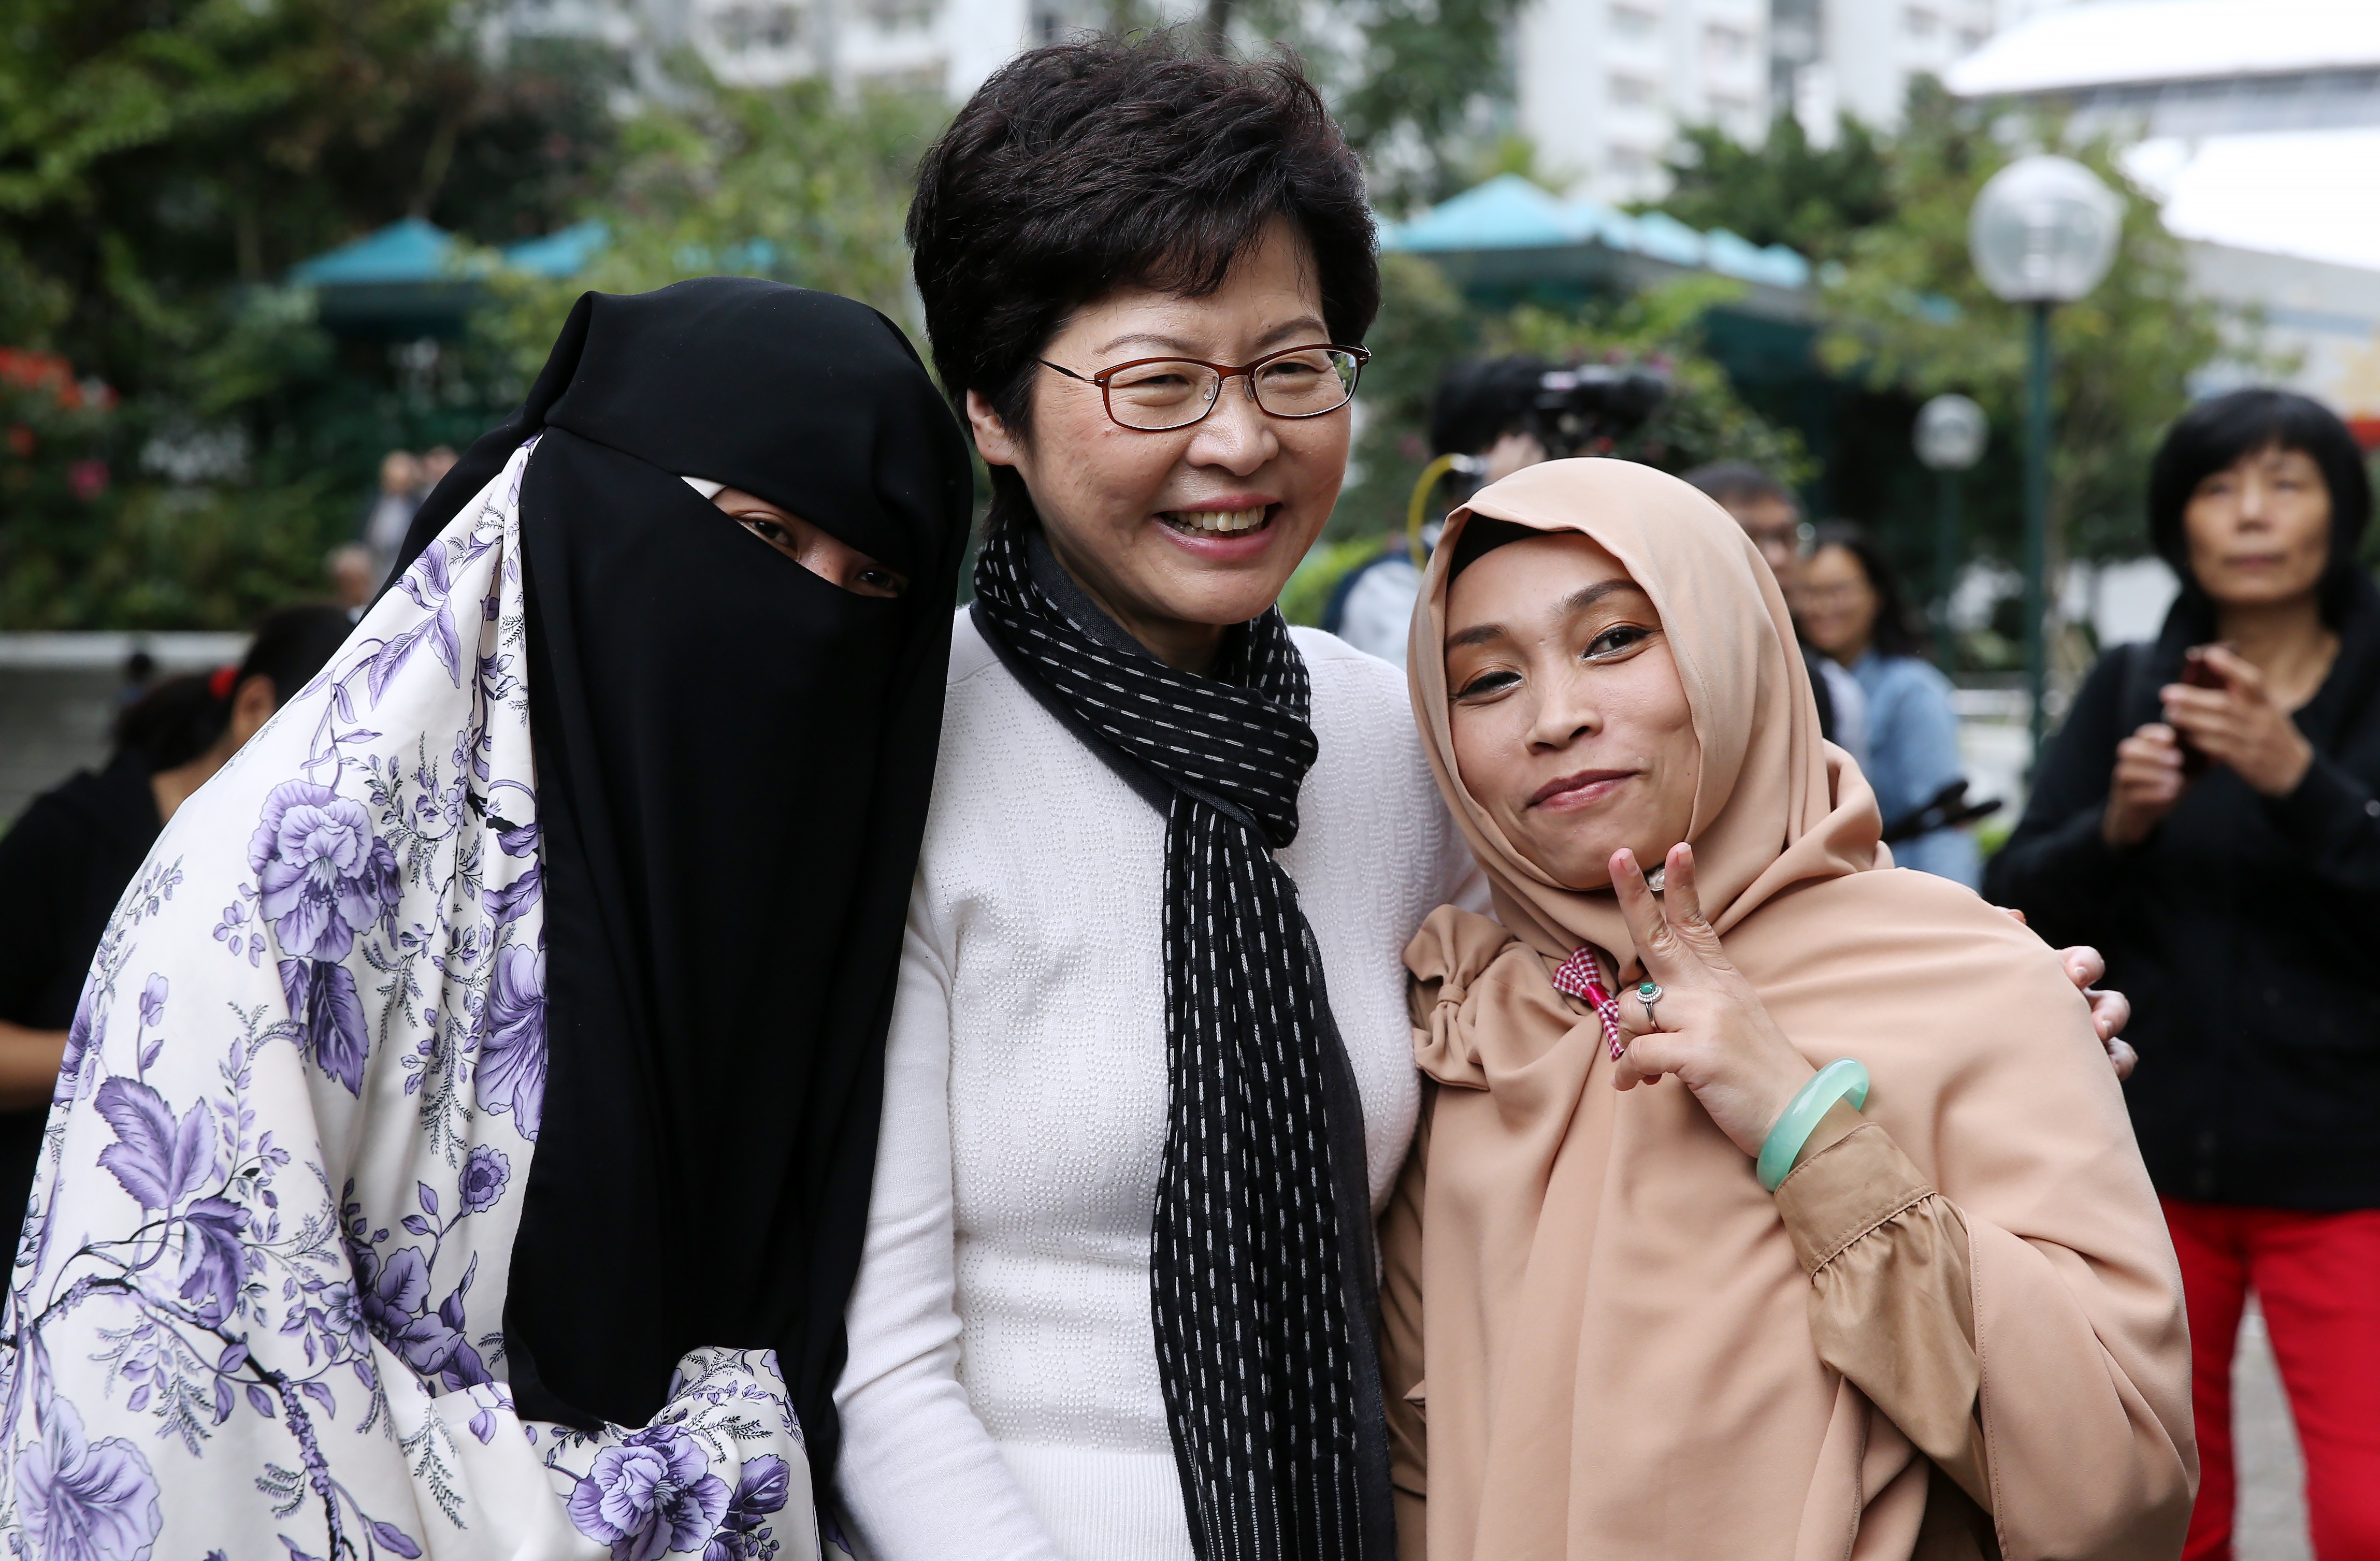 Chief Executive Carrie Lam Cheng Yuet-ngor meets ethnic minority residents in Hung Hom after winning the chief executive election in late March 2017. Photo: Sam Tsang